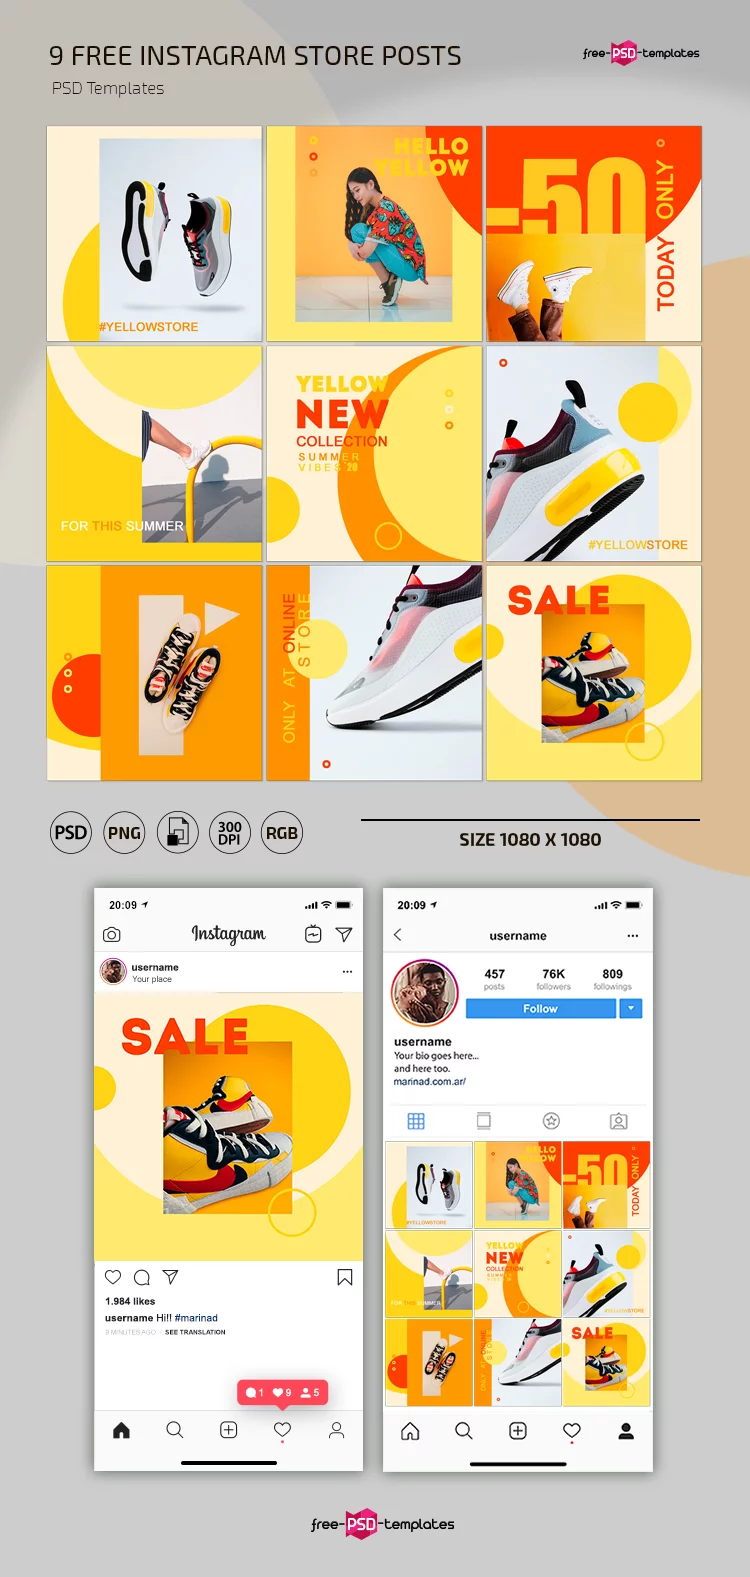 Instagram Store Posts Template in PSD